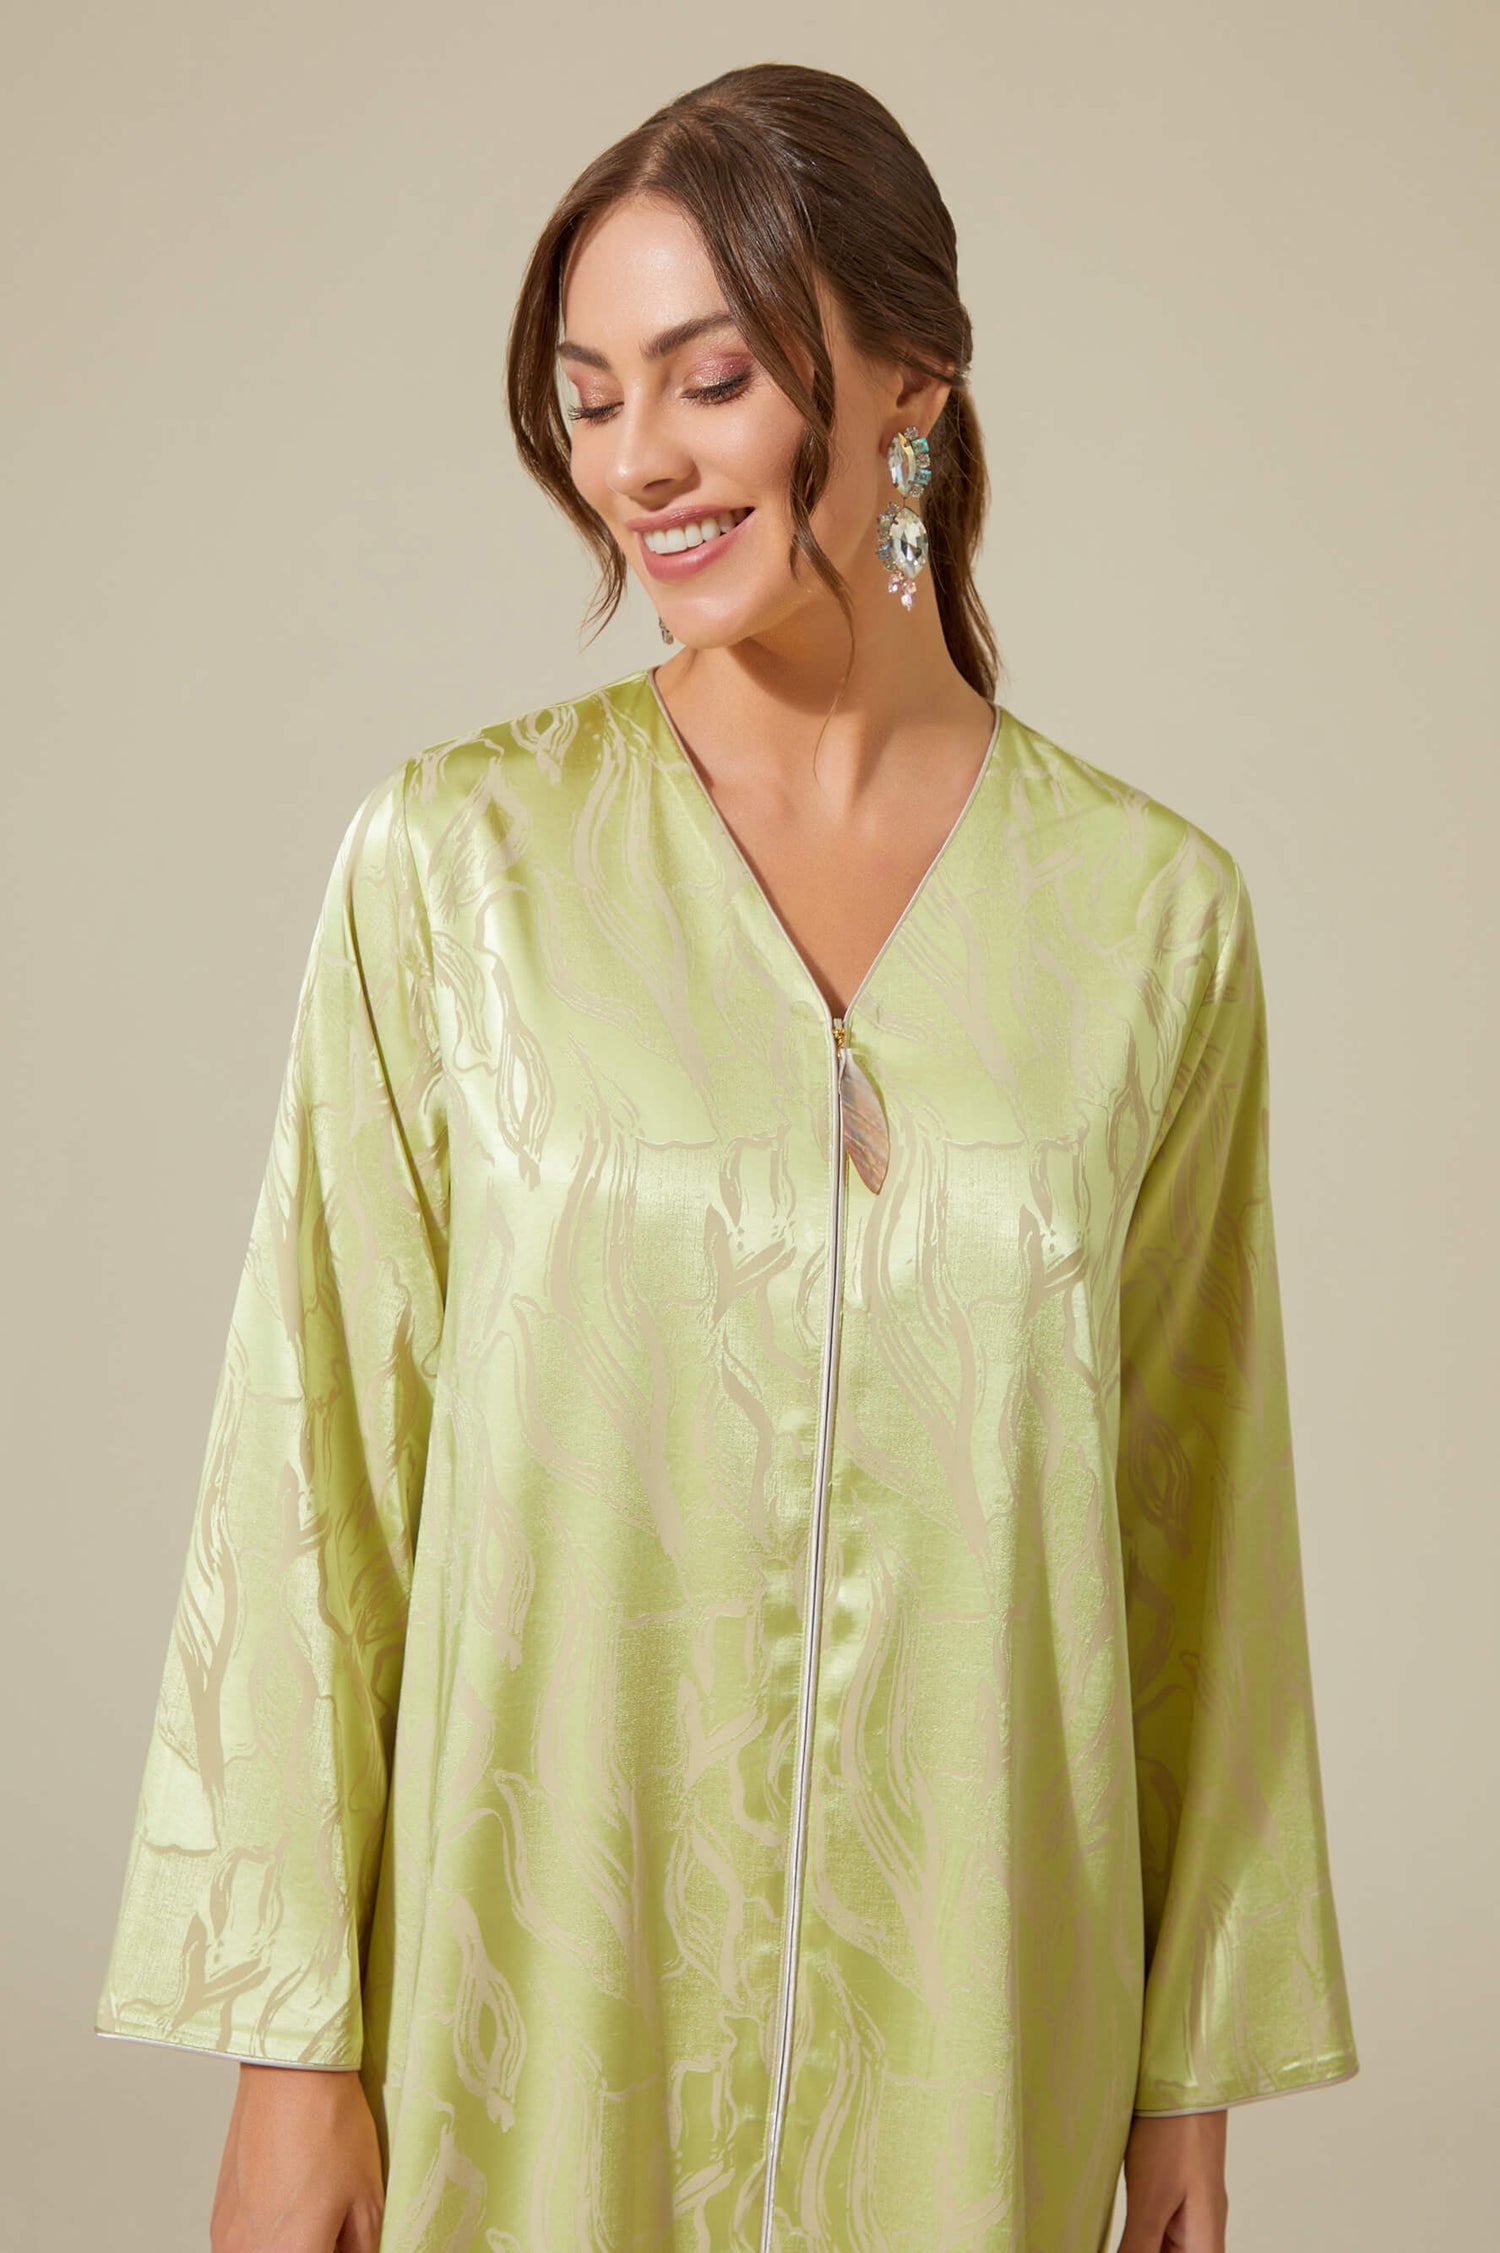 Sahara - Luxury Patterned and Zippered Silk and Viscose Full Length Dress - Pistachio Green